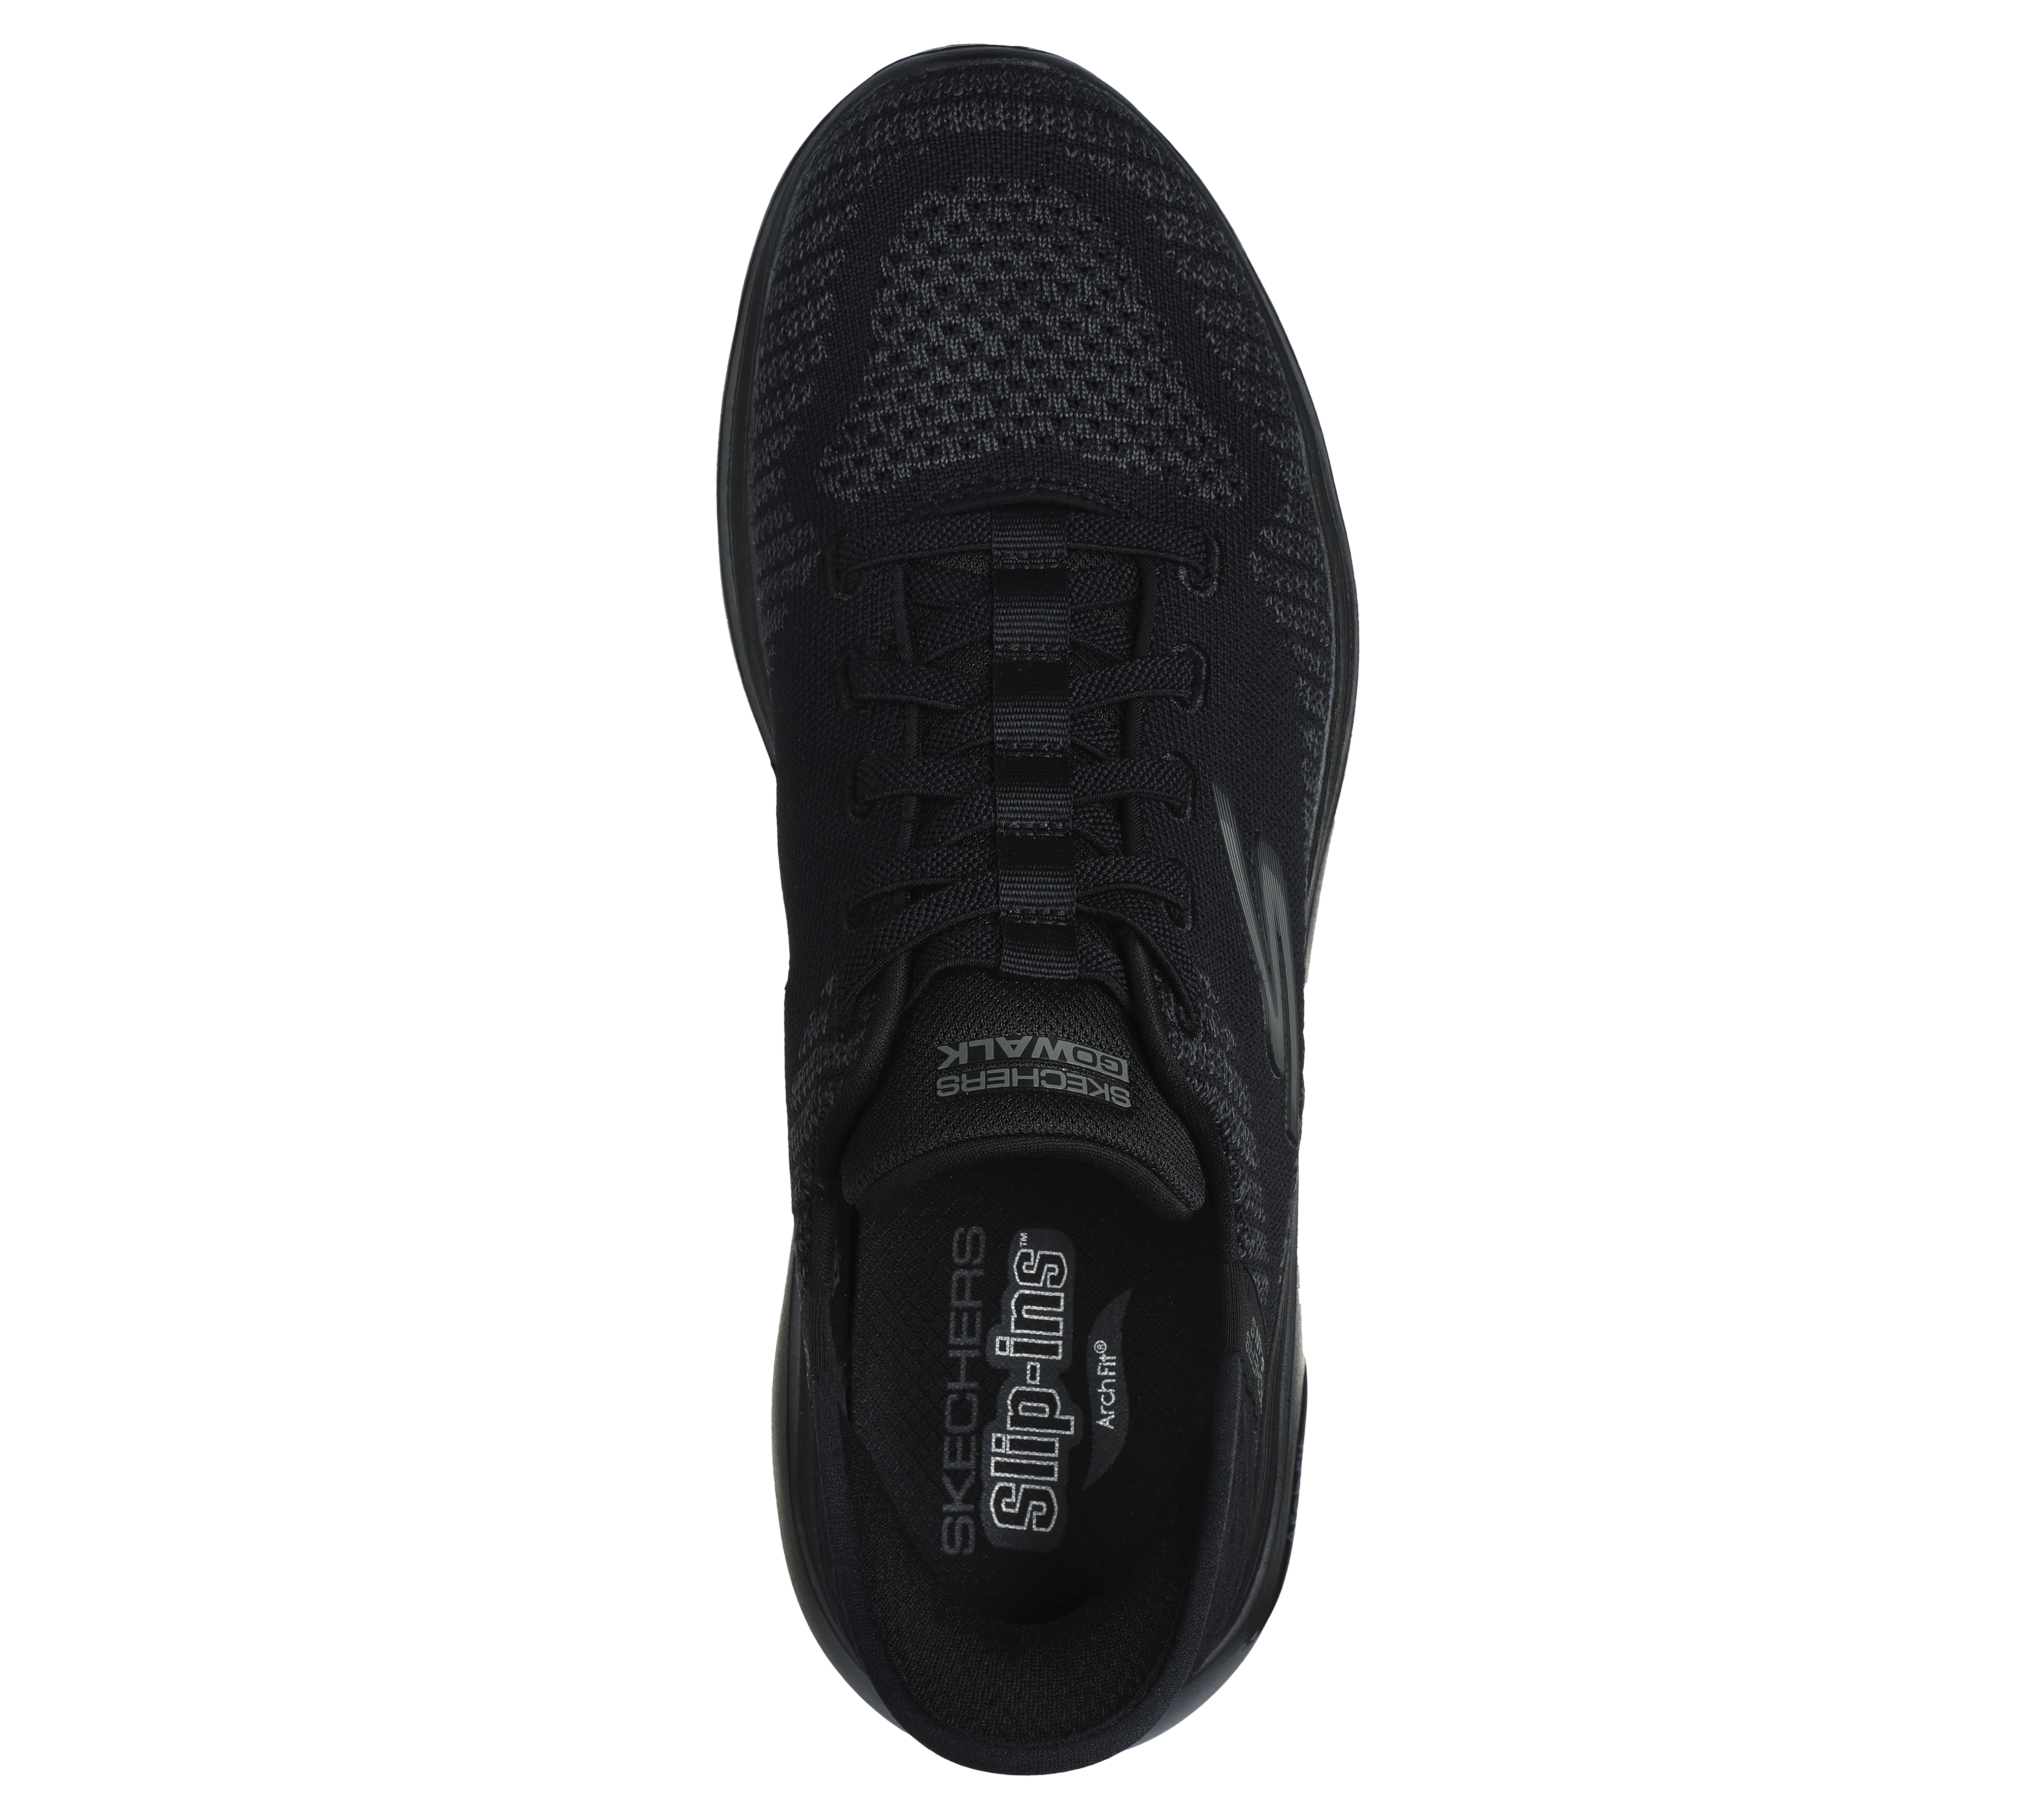 Fit | Skechers Select Grand 2.0 SKECHERS Arch 2 Slip-ins: -